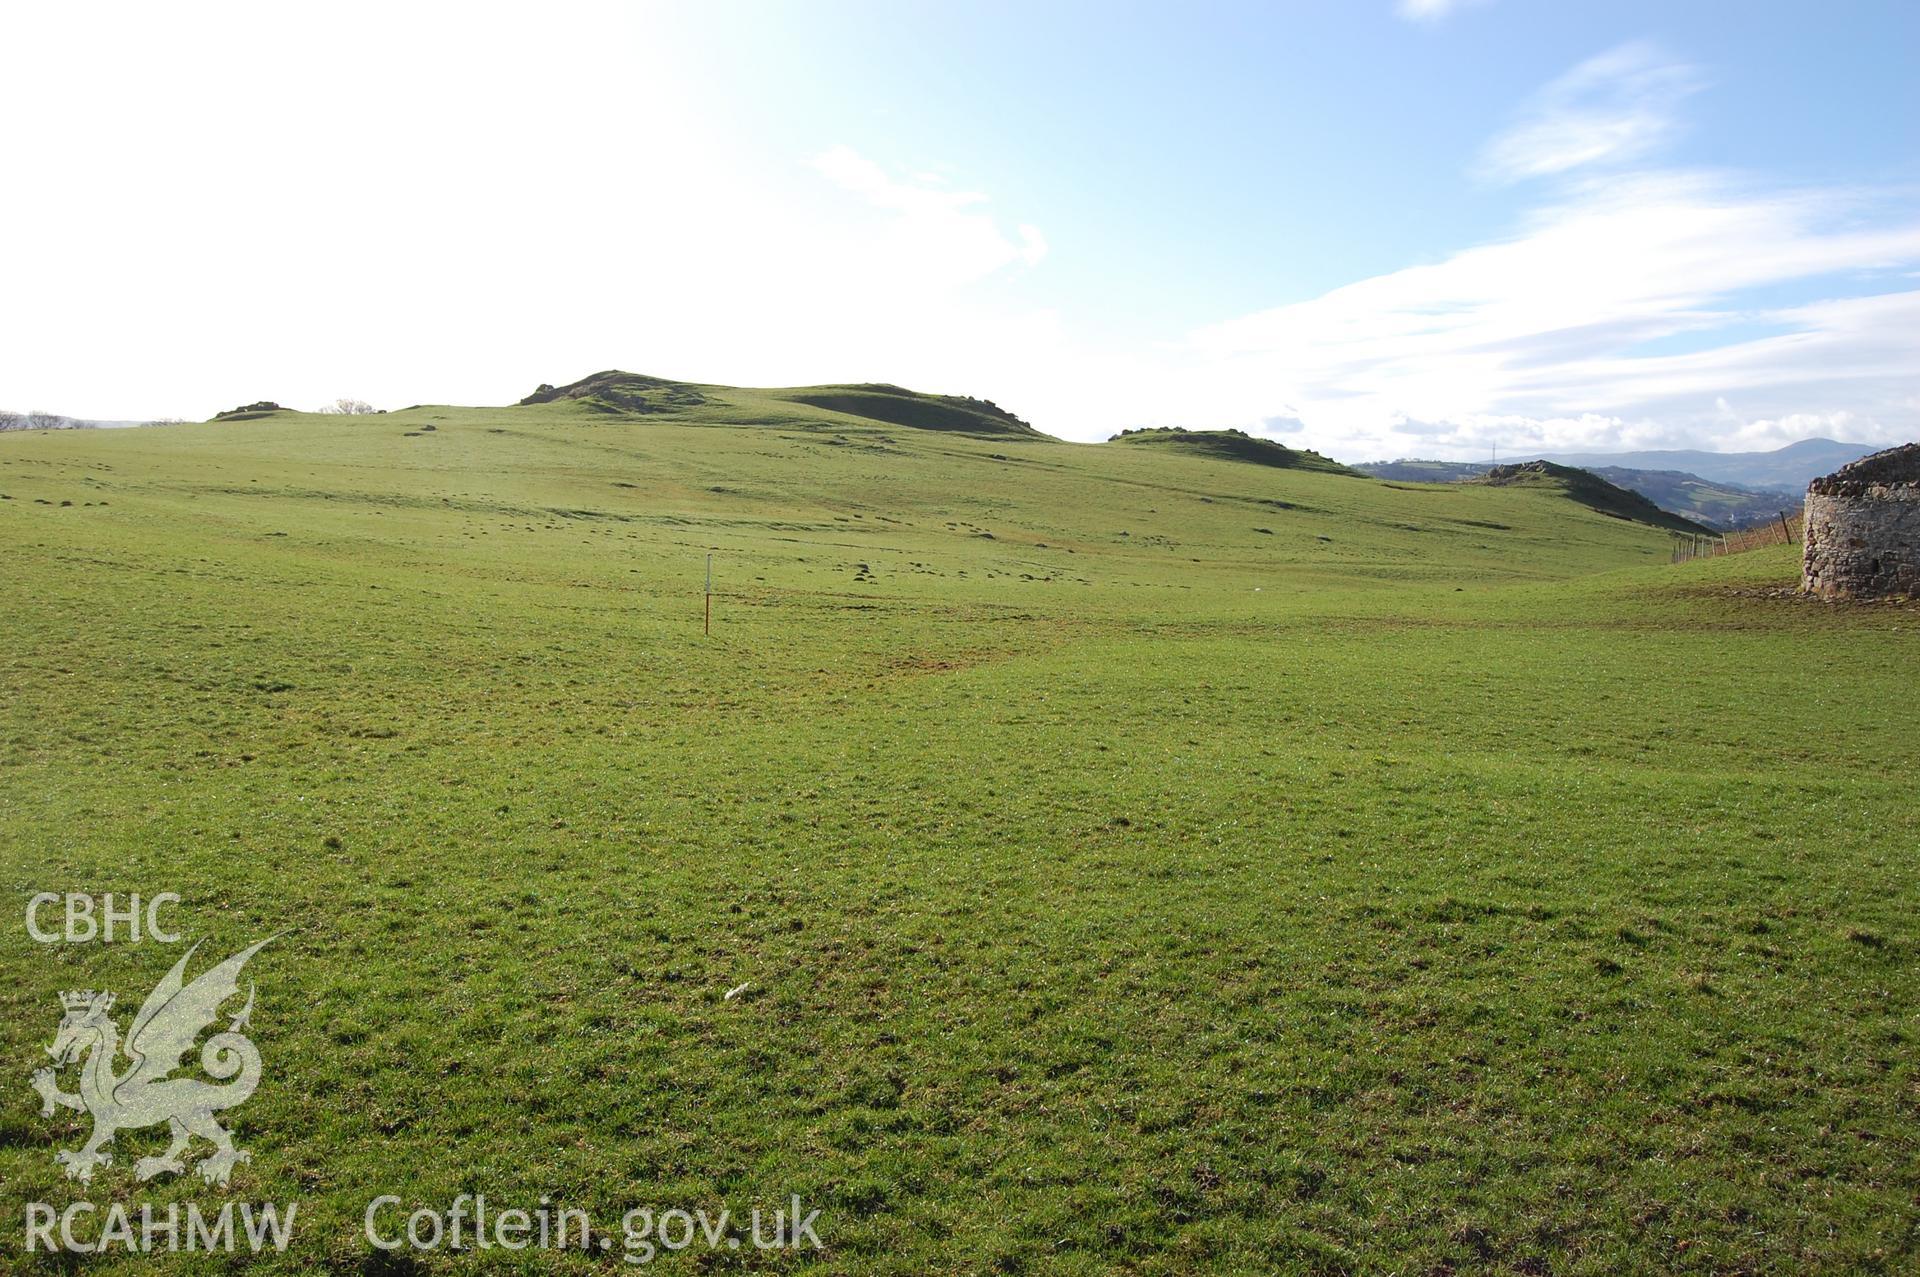 Digital photograph from an archaeological assessment of Deganwy Castle, carried out by Gwynedd Archaeological Trust, 2009. North end of hollow-way before it splits to go to the castle.